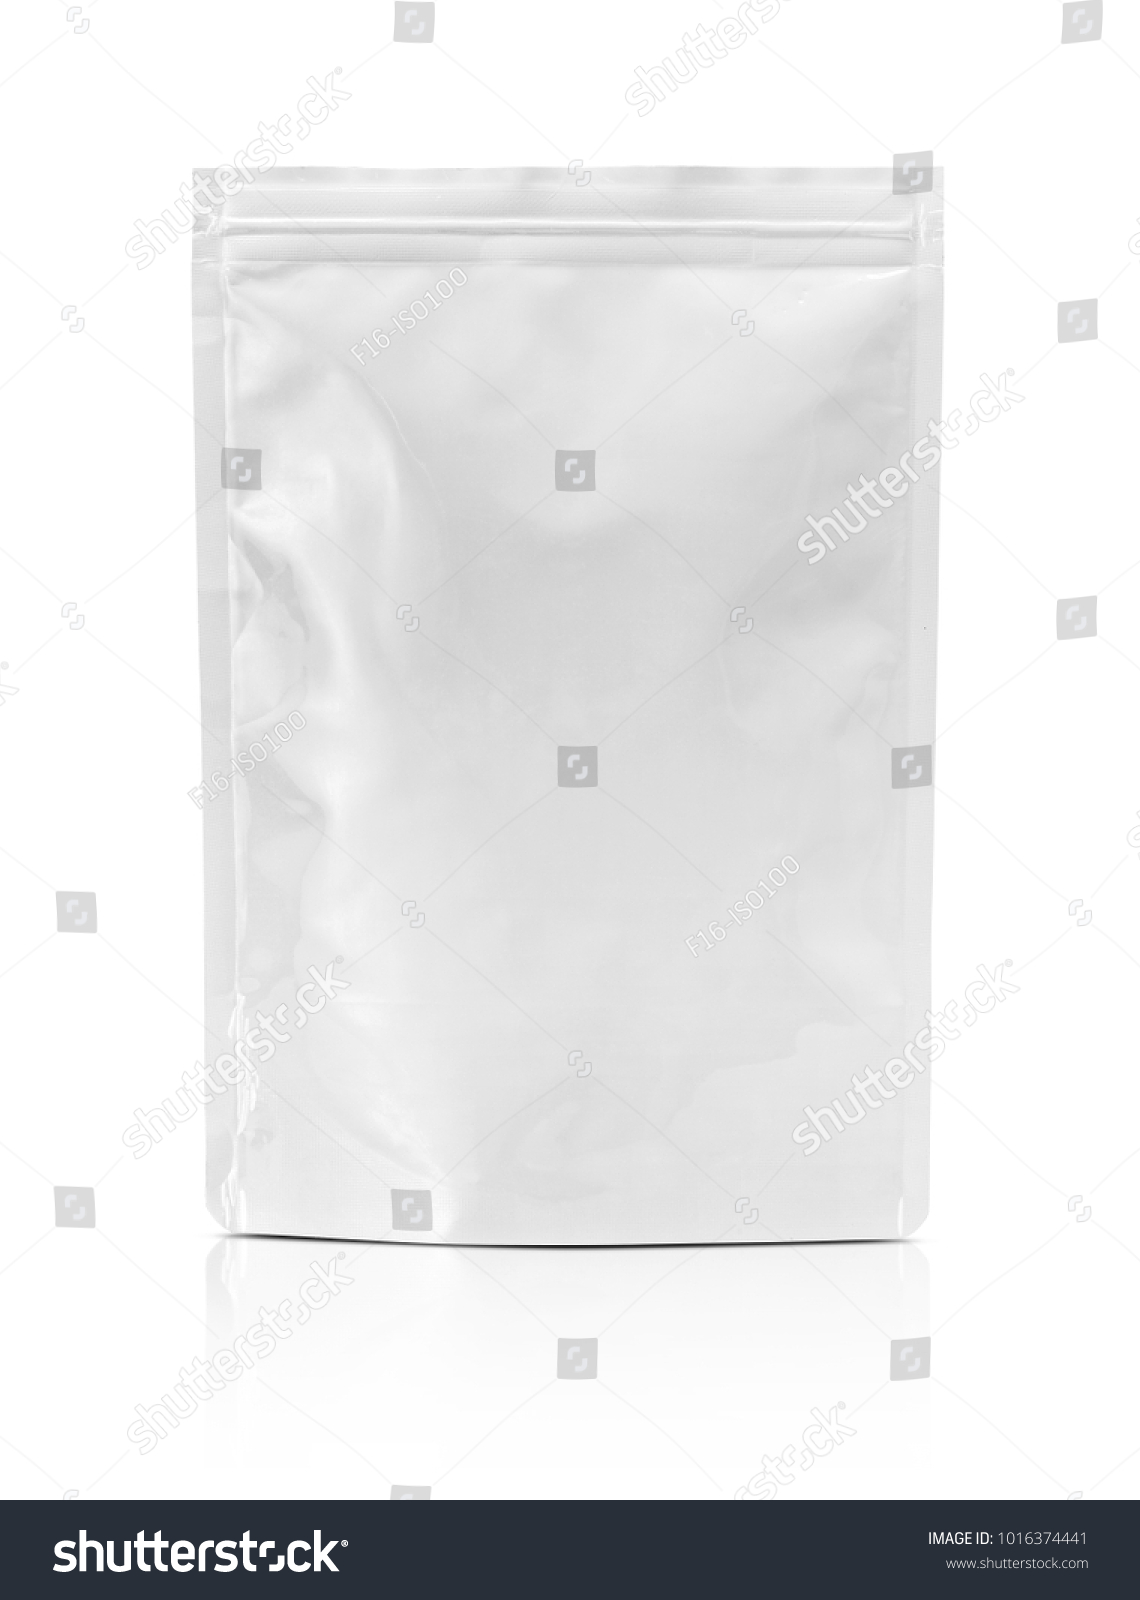 blank packaging aluminum foil pouch isolated on white background with clipping path ready for package design #1016374441